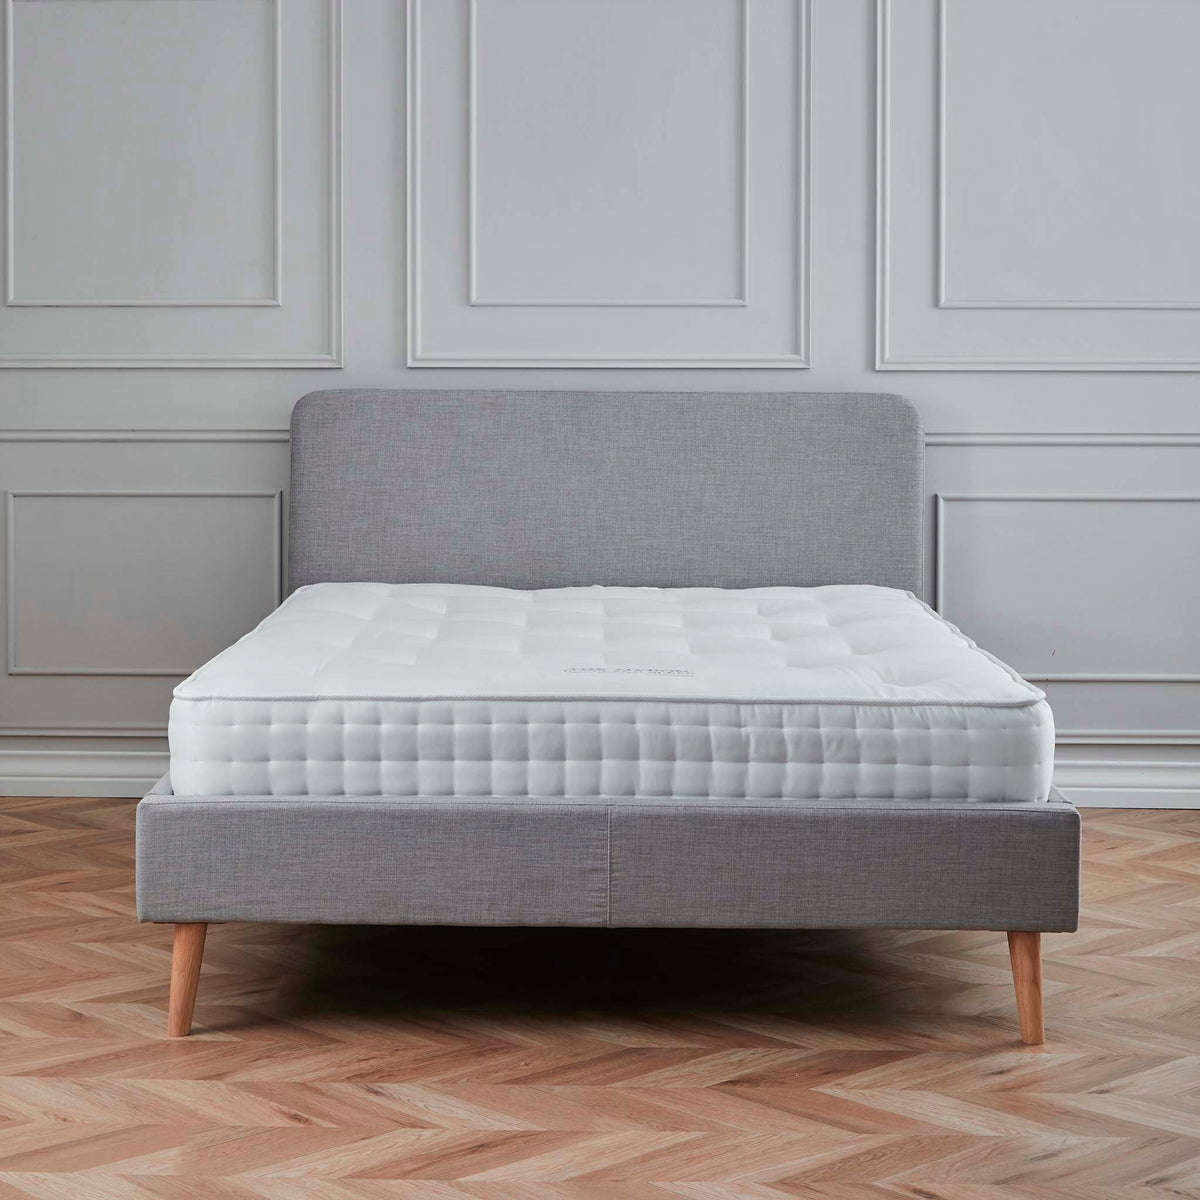 Otto Light Grey Upholstered Bed Frame - Front Lifestyle